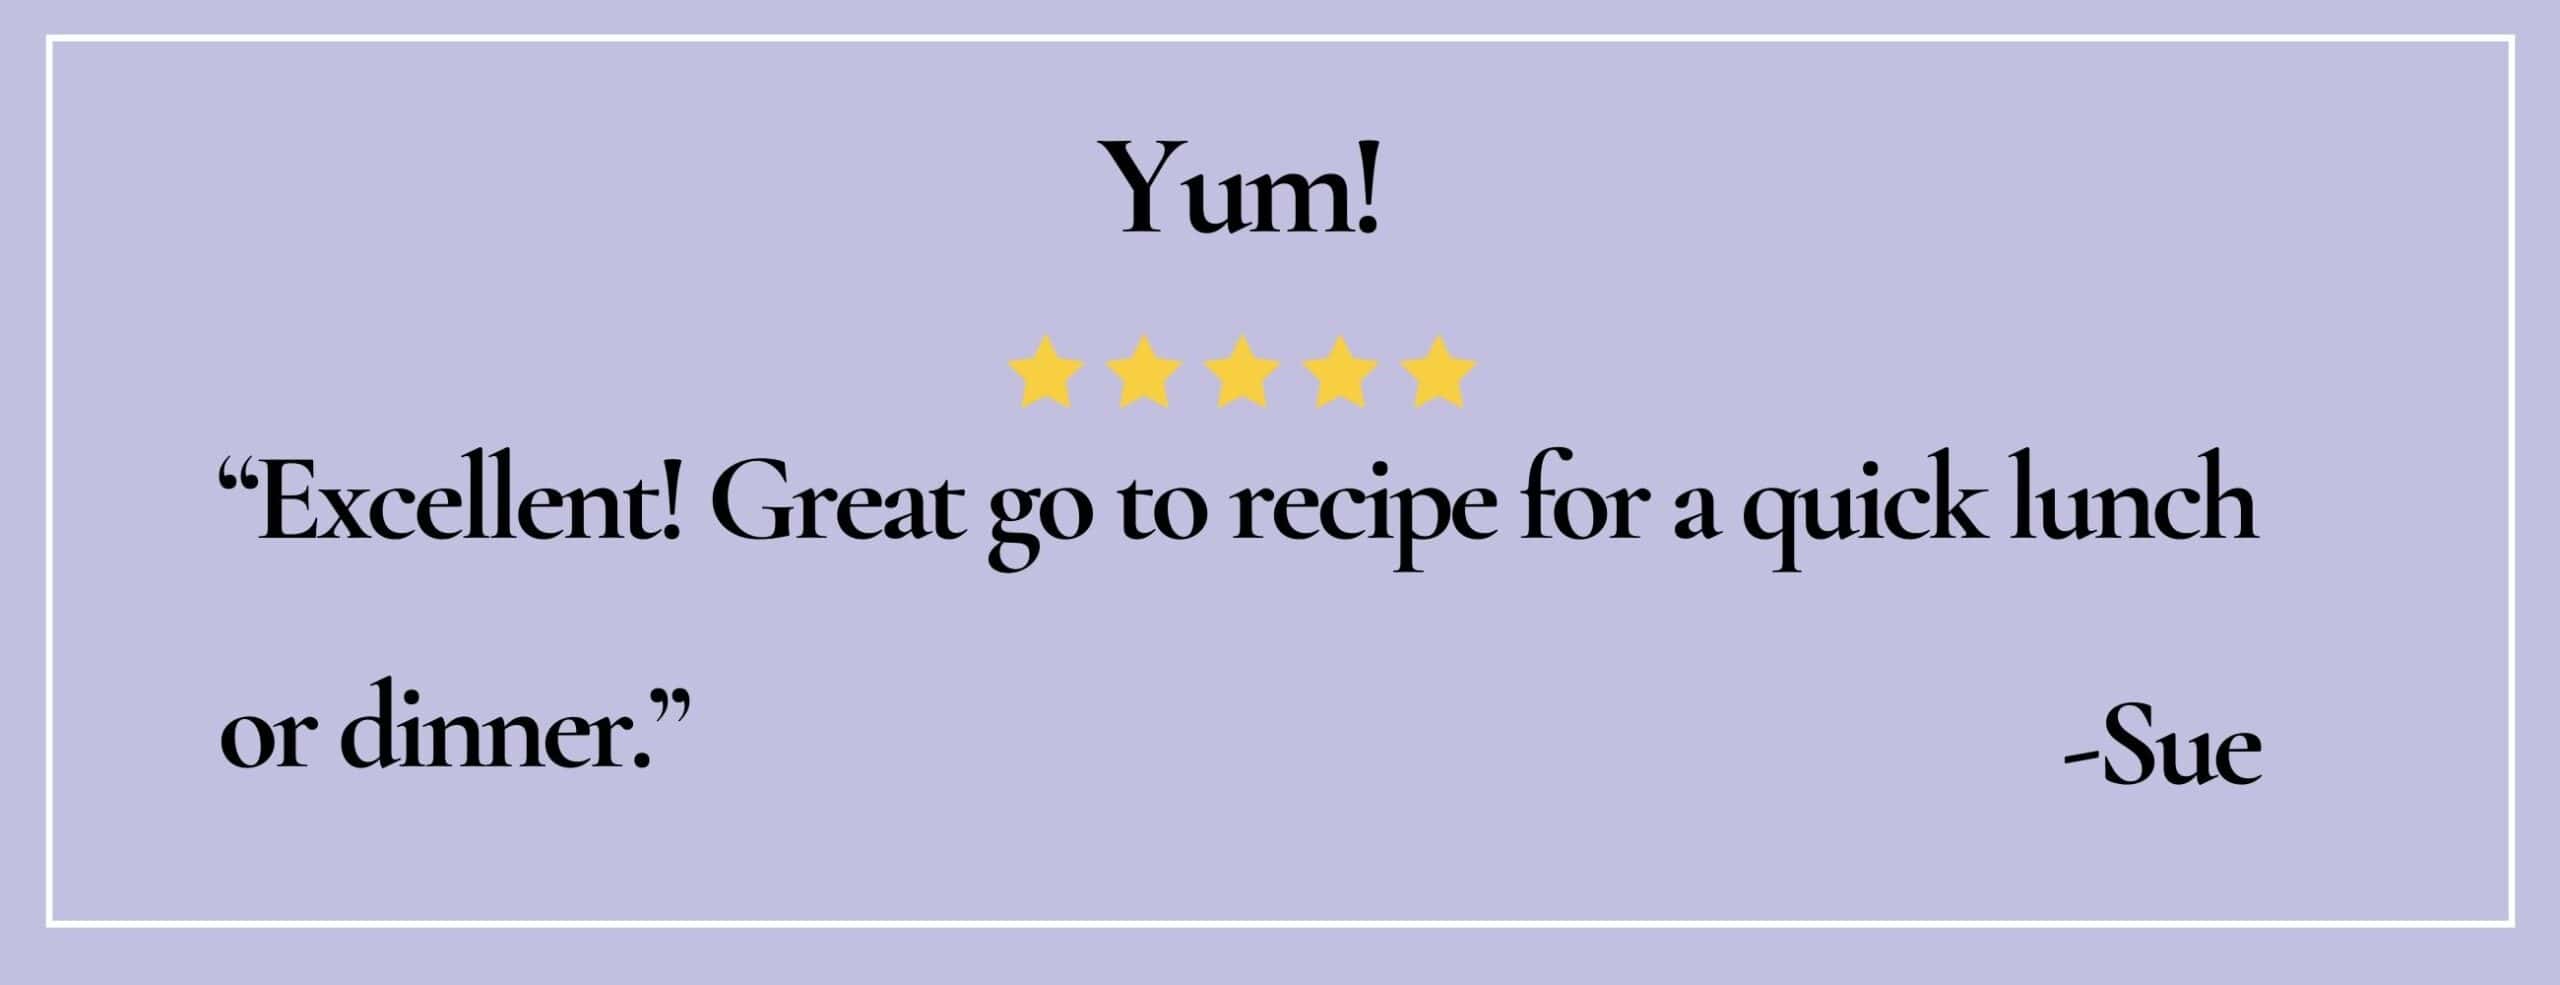 Text box with quote: Yum! "Excellent! Great go to recipe for a quick lunch or dinner" -Sue